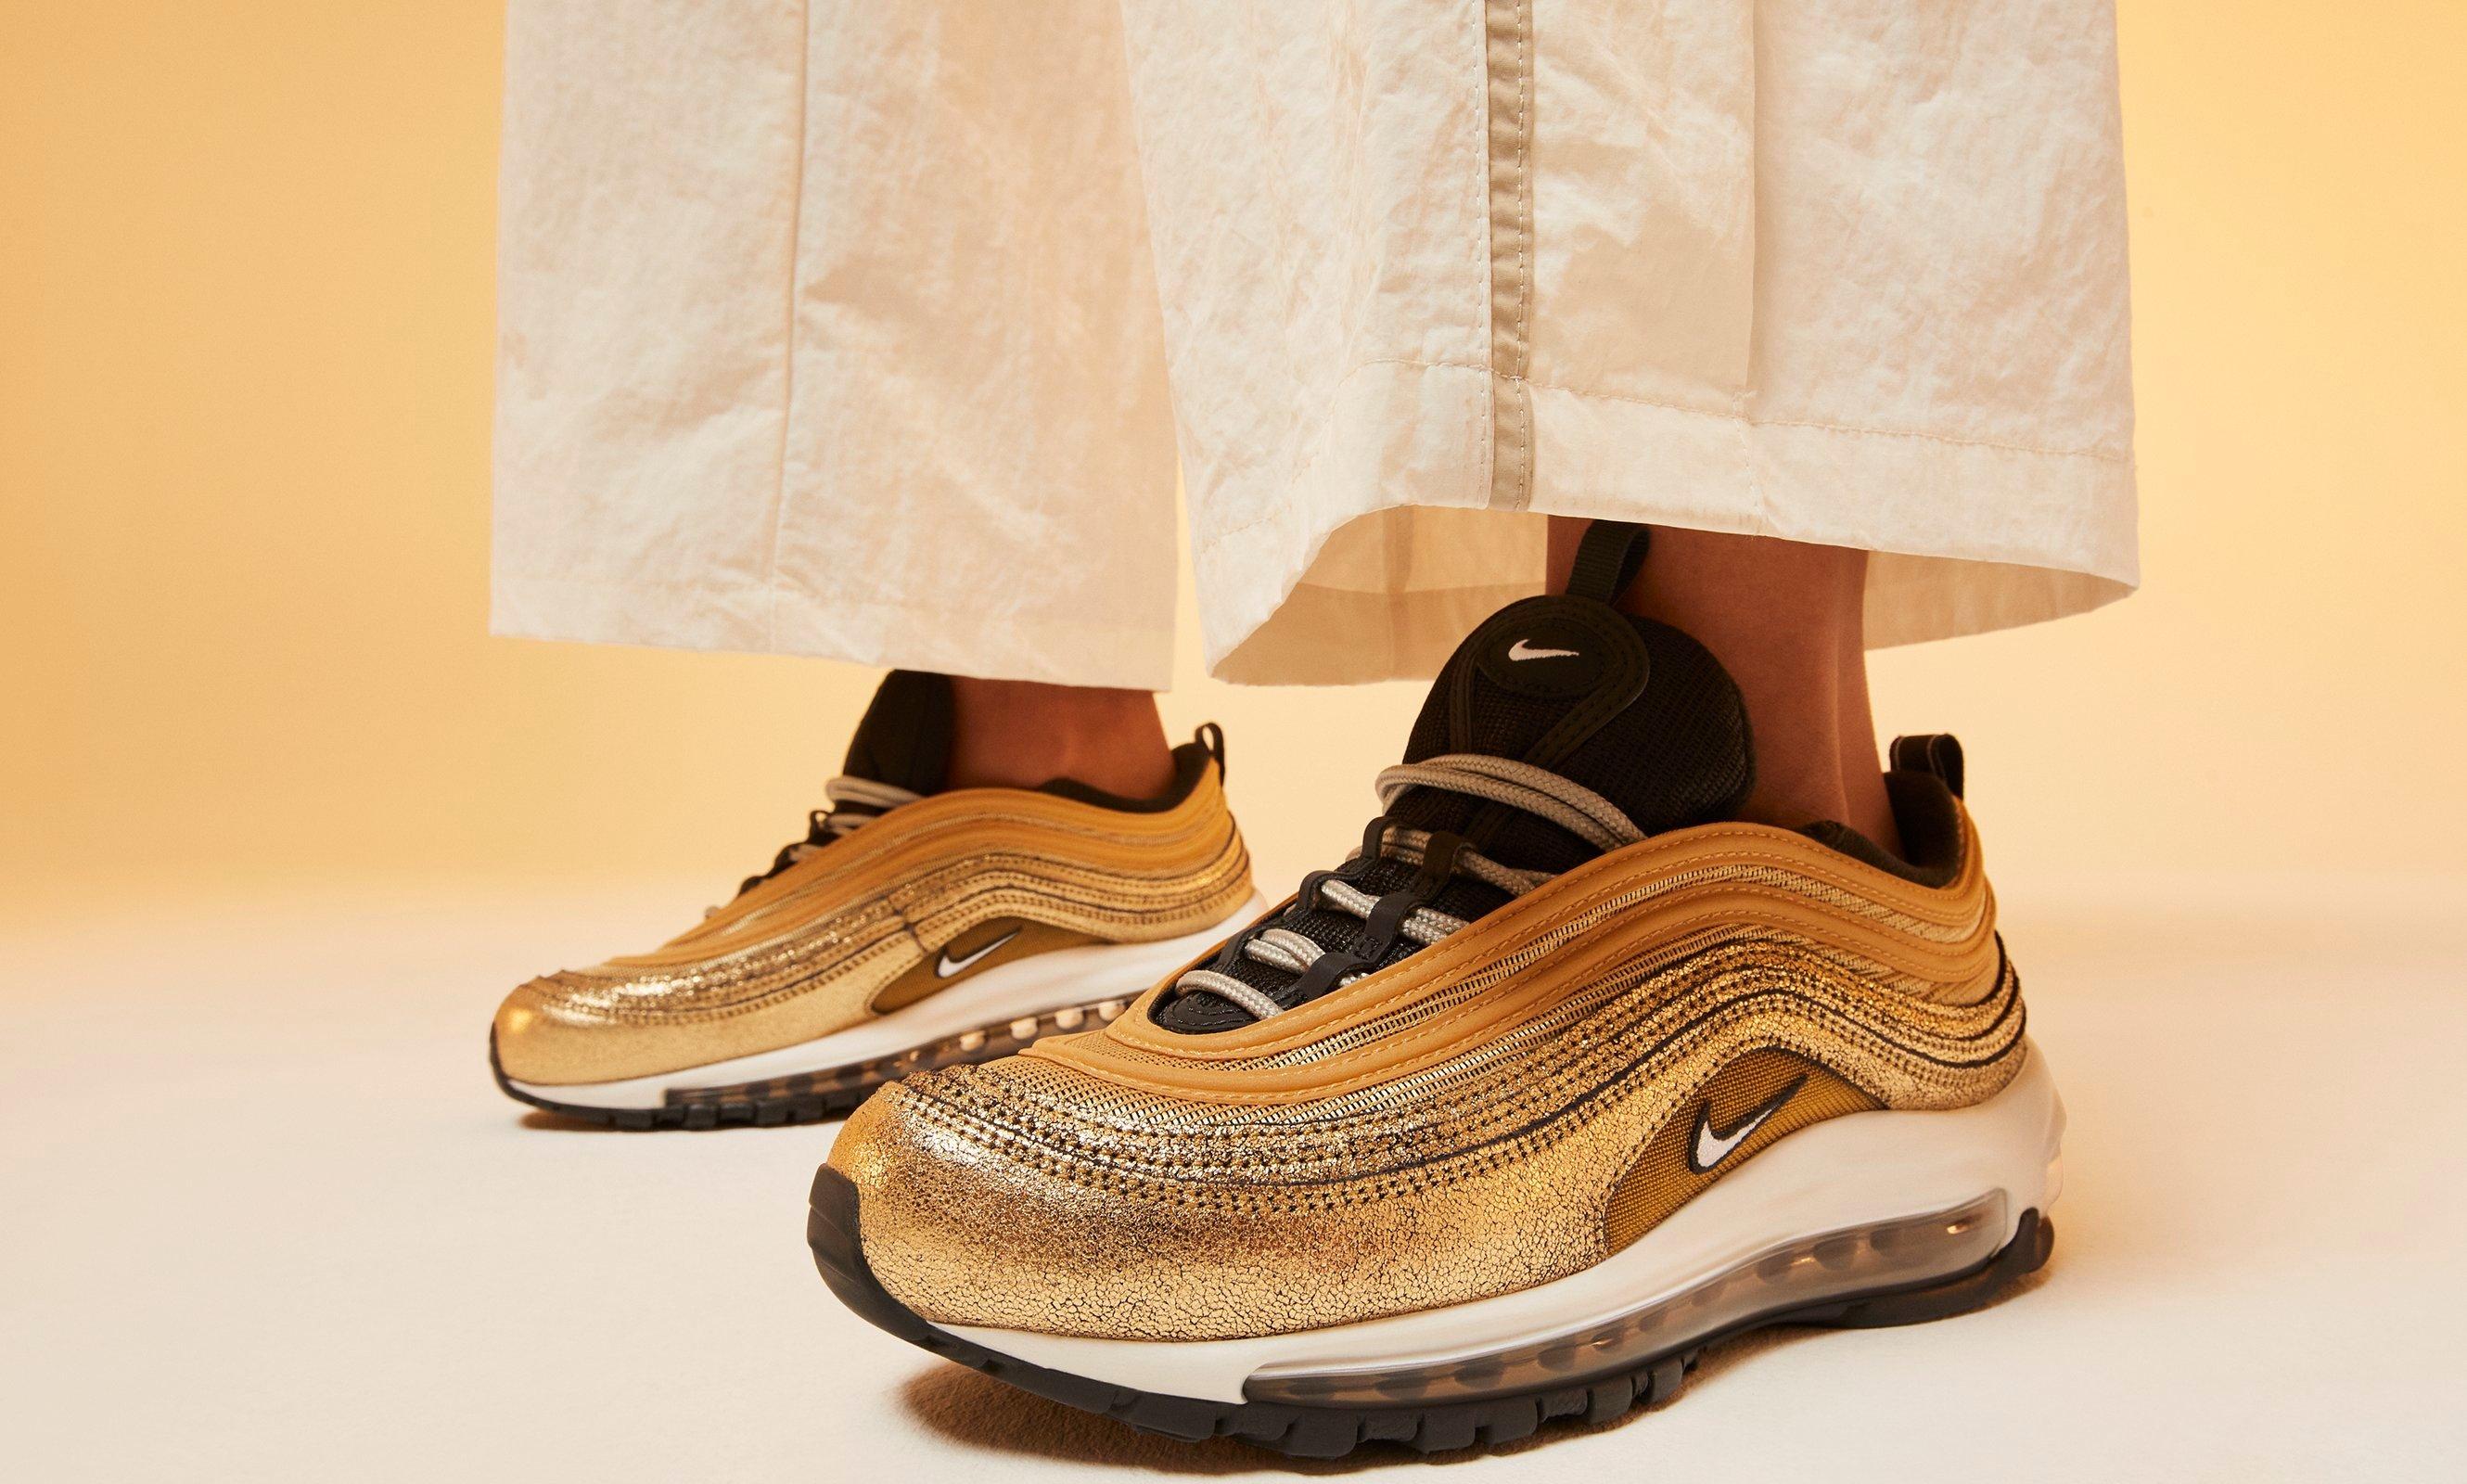 Worth their weight in gold : Nike Air Max 97 Metallic Gold